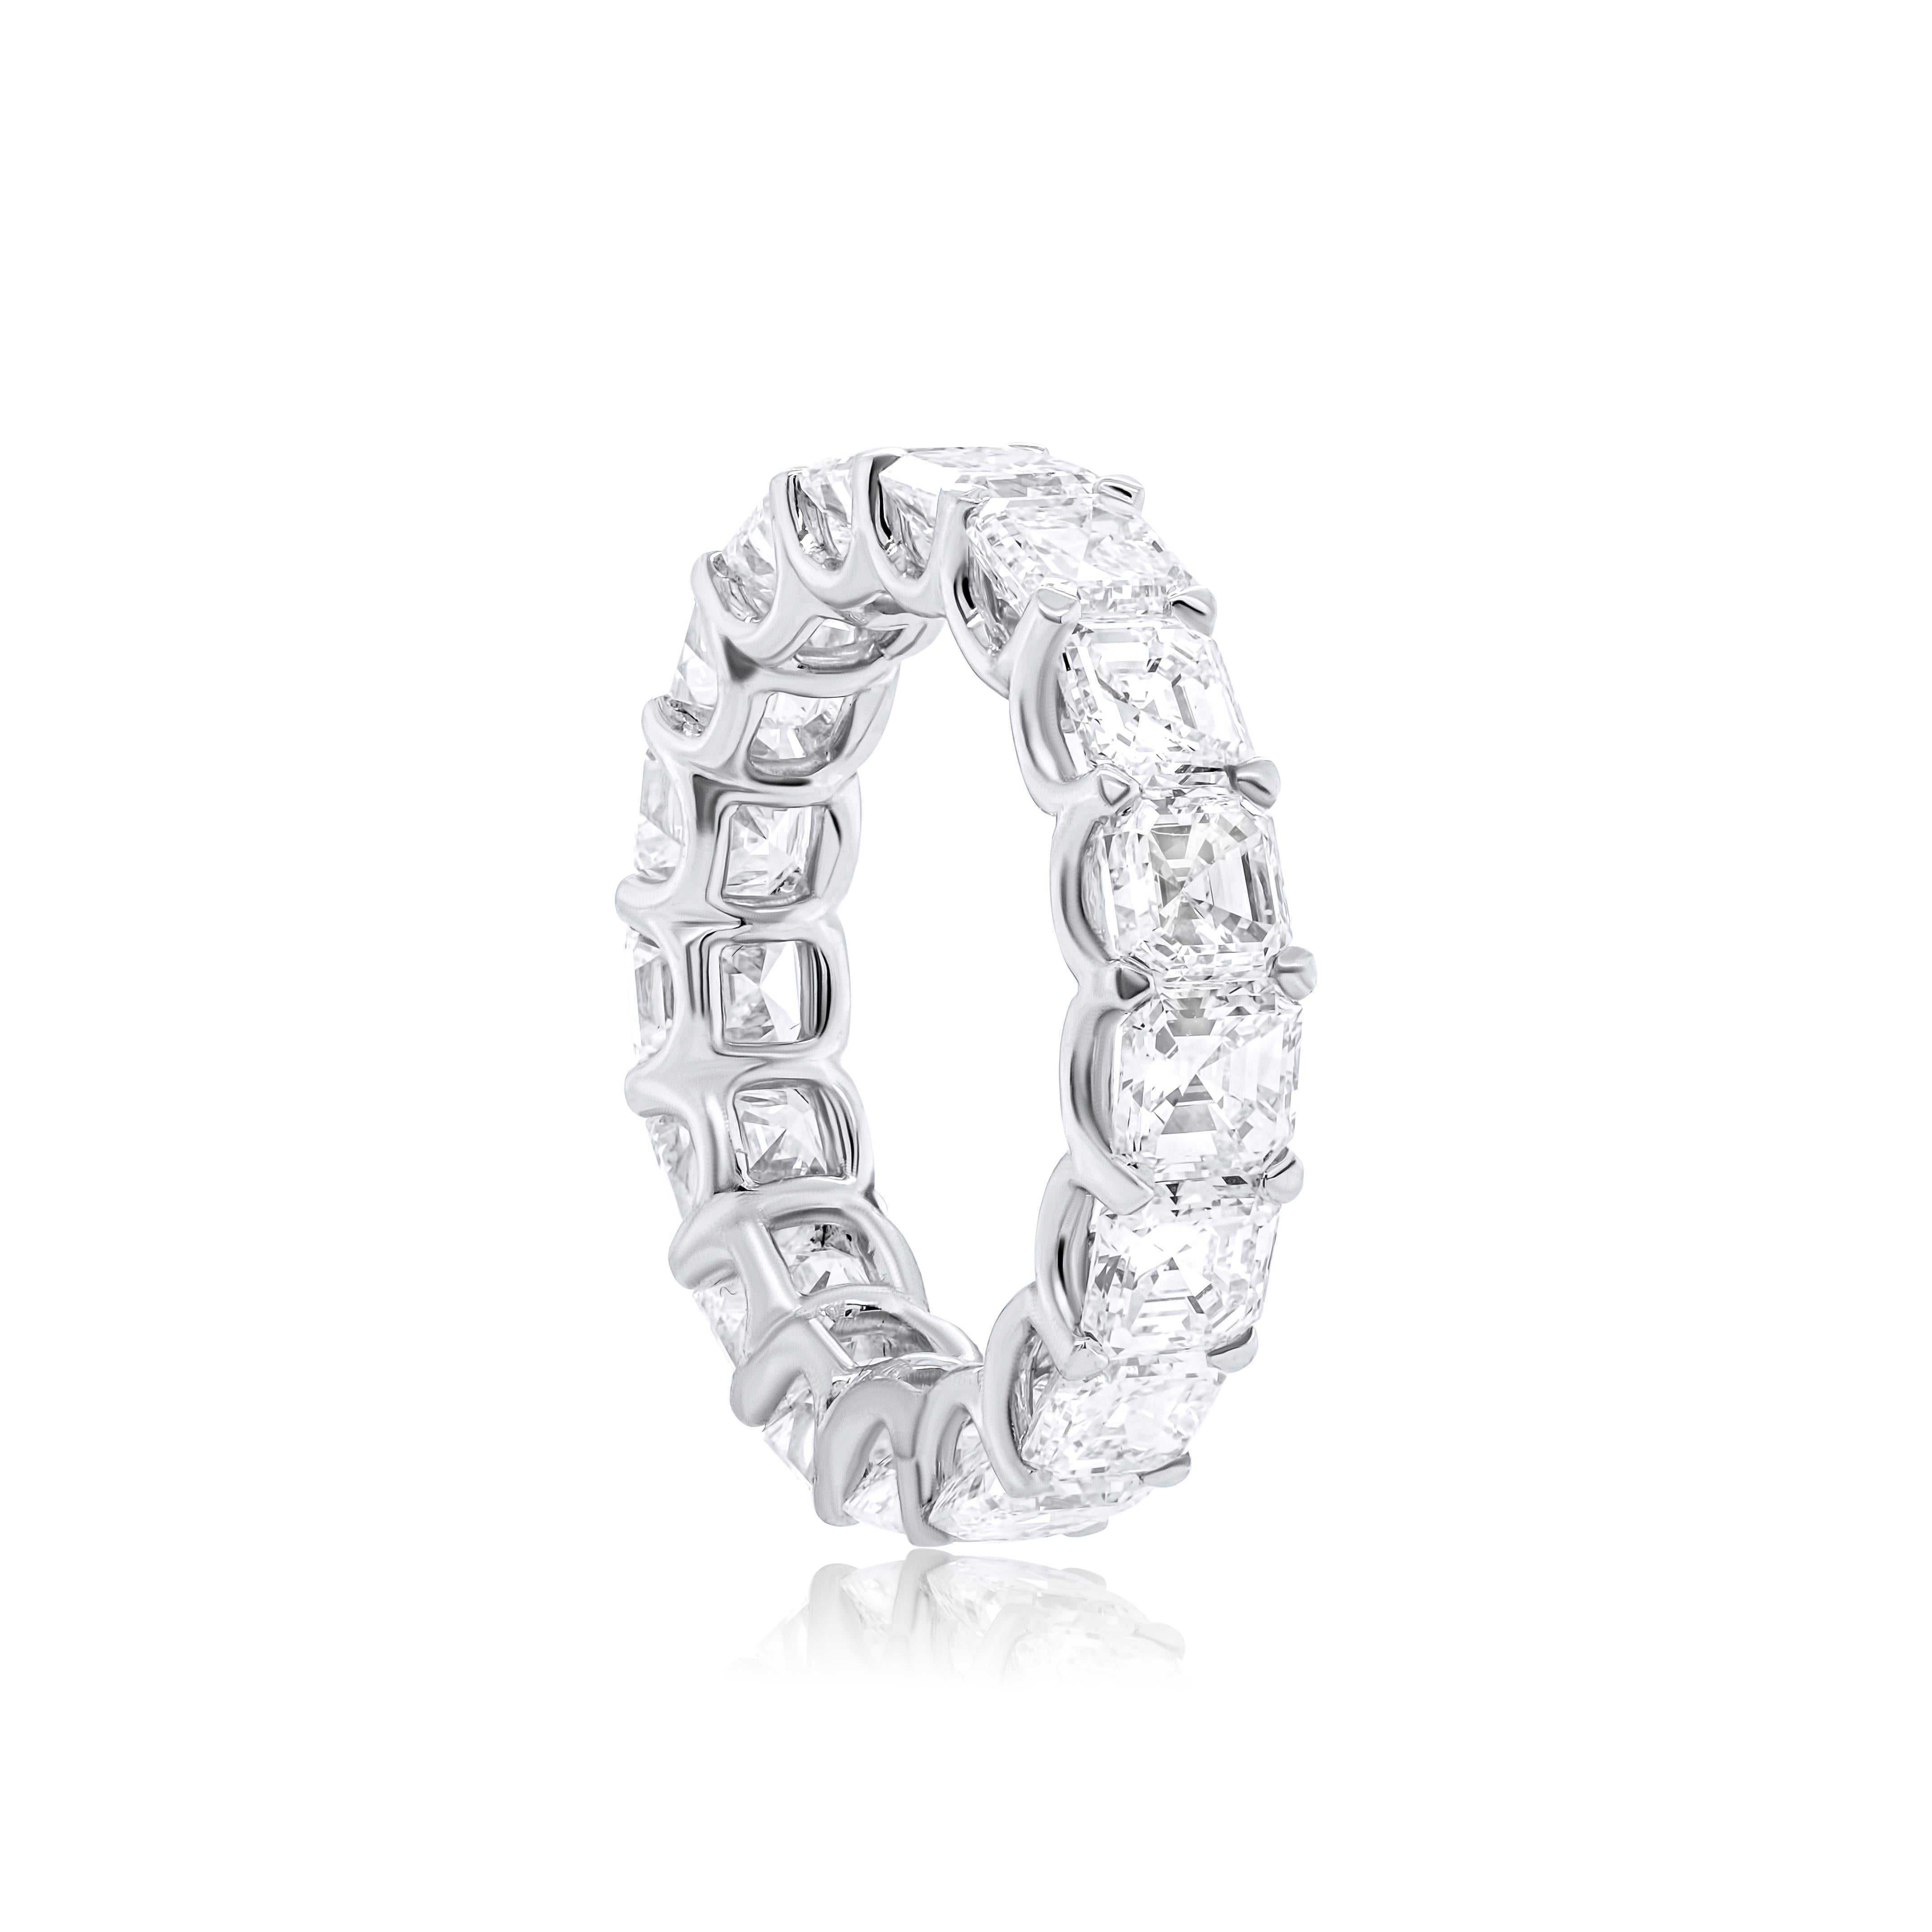  Platinum asscher cut diamonds VVSVS def eternity wedding band with 8.85ct of diamonds total weight 
Diana M. is a leading supplier of top-quality fine jewelry for over 35 years.
Diana M is one-stop shop for all your jewelry shopping, carrying line